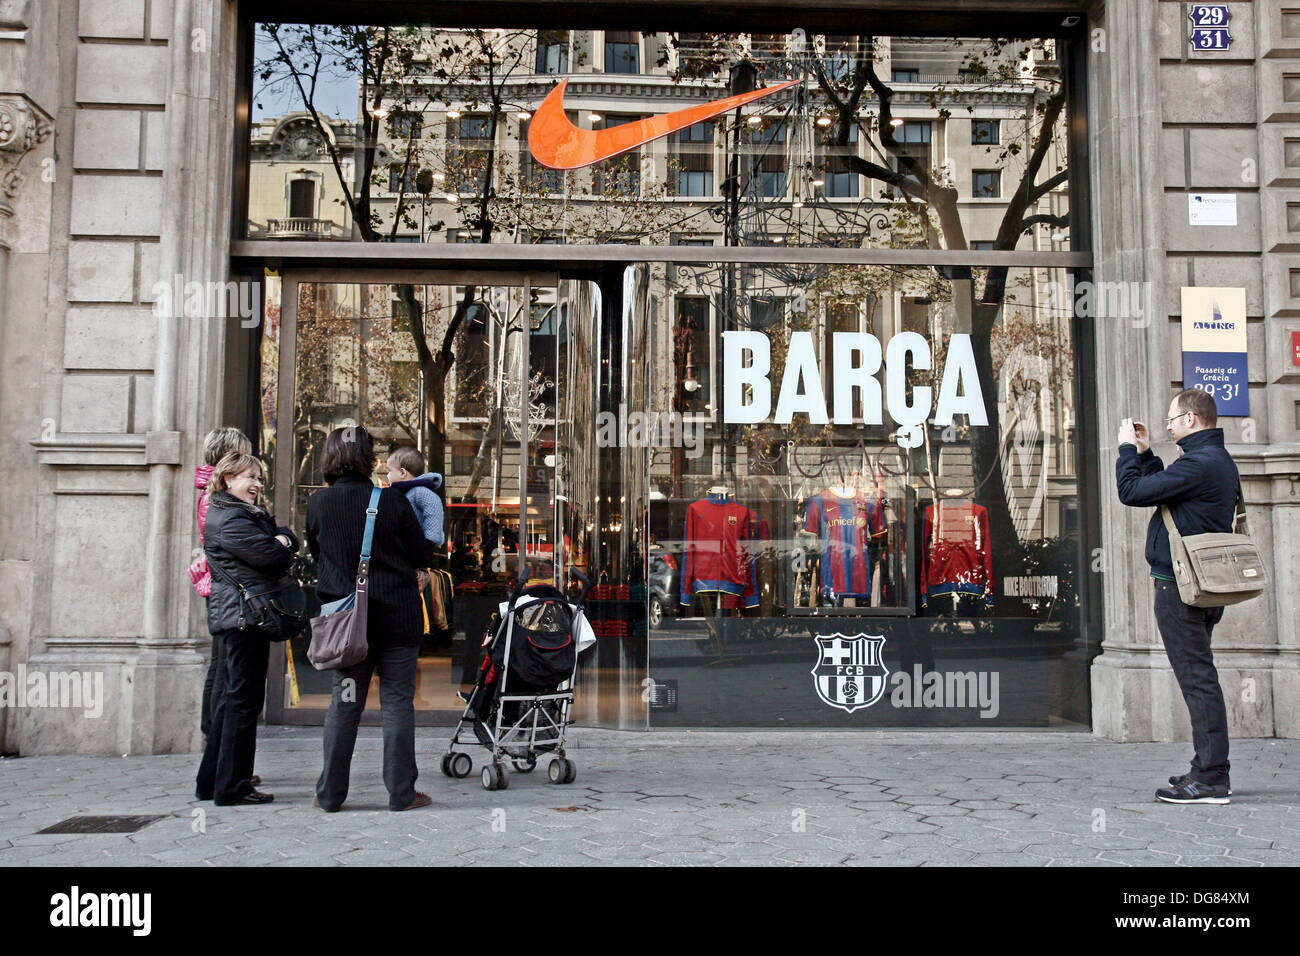 Barça shop High Resolution Stock Photography and Images - Alamy